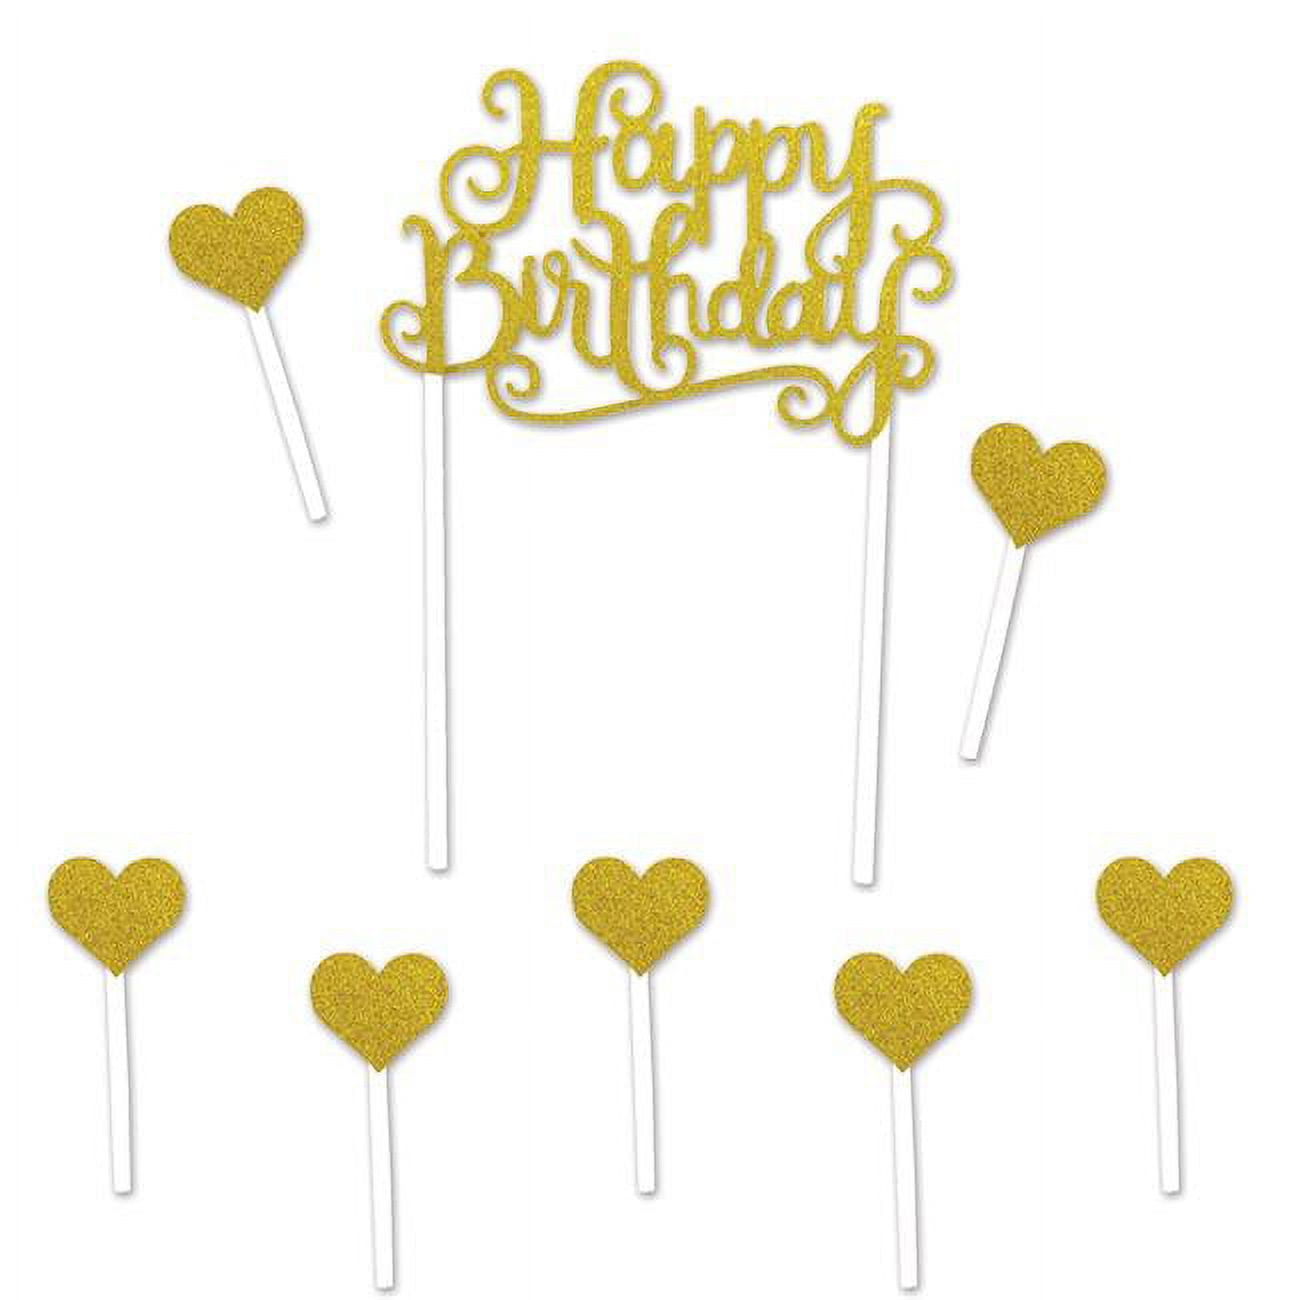 Beistle 52216 Happy Birthday Cake Topper, Gold - Pack Of 12